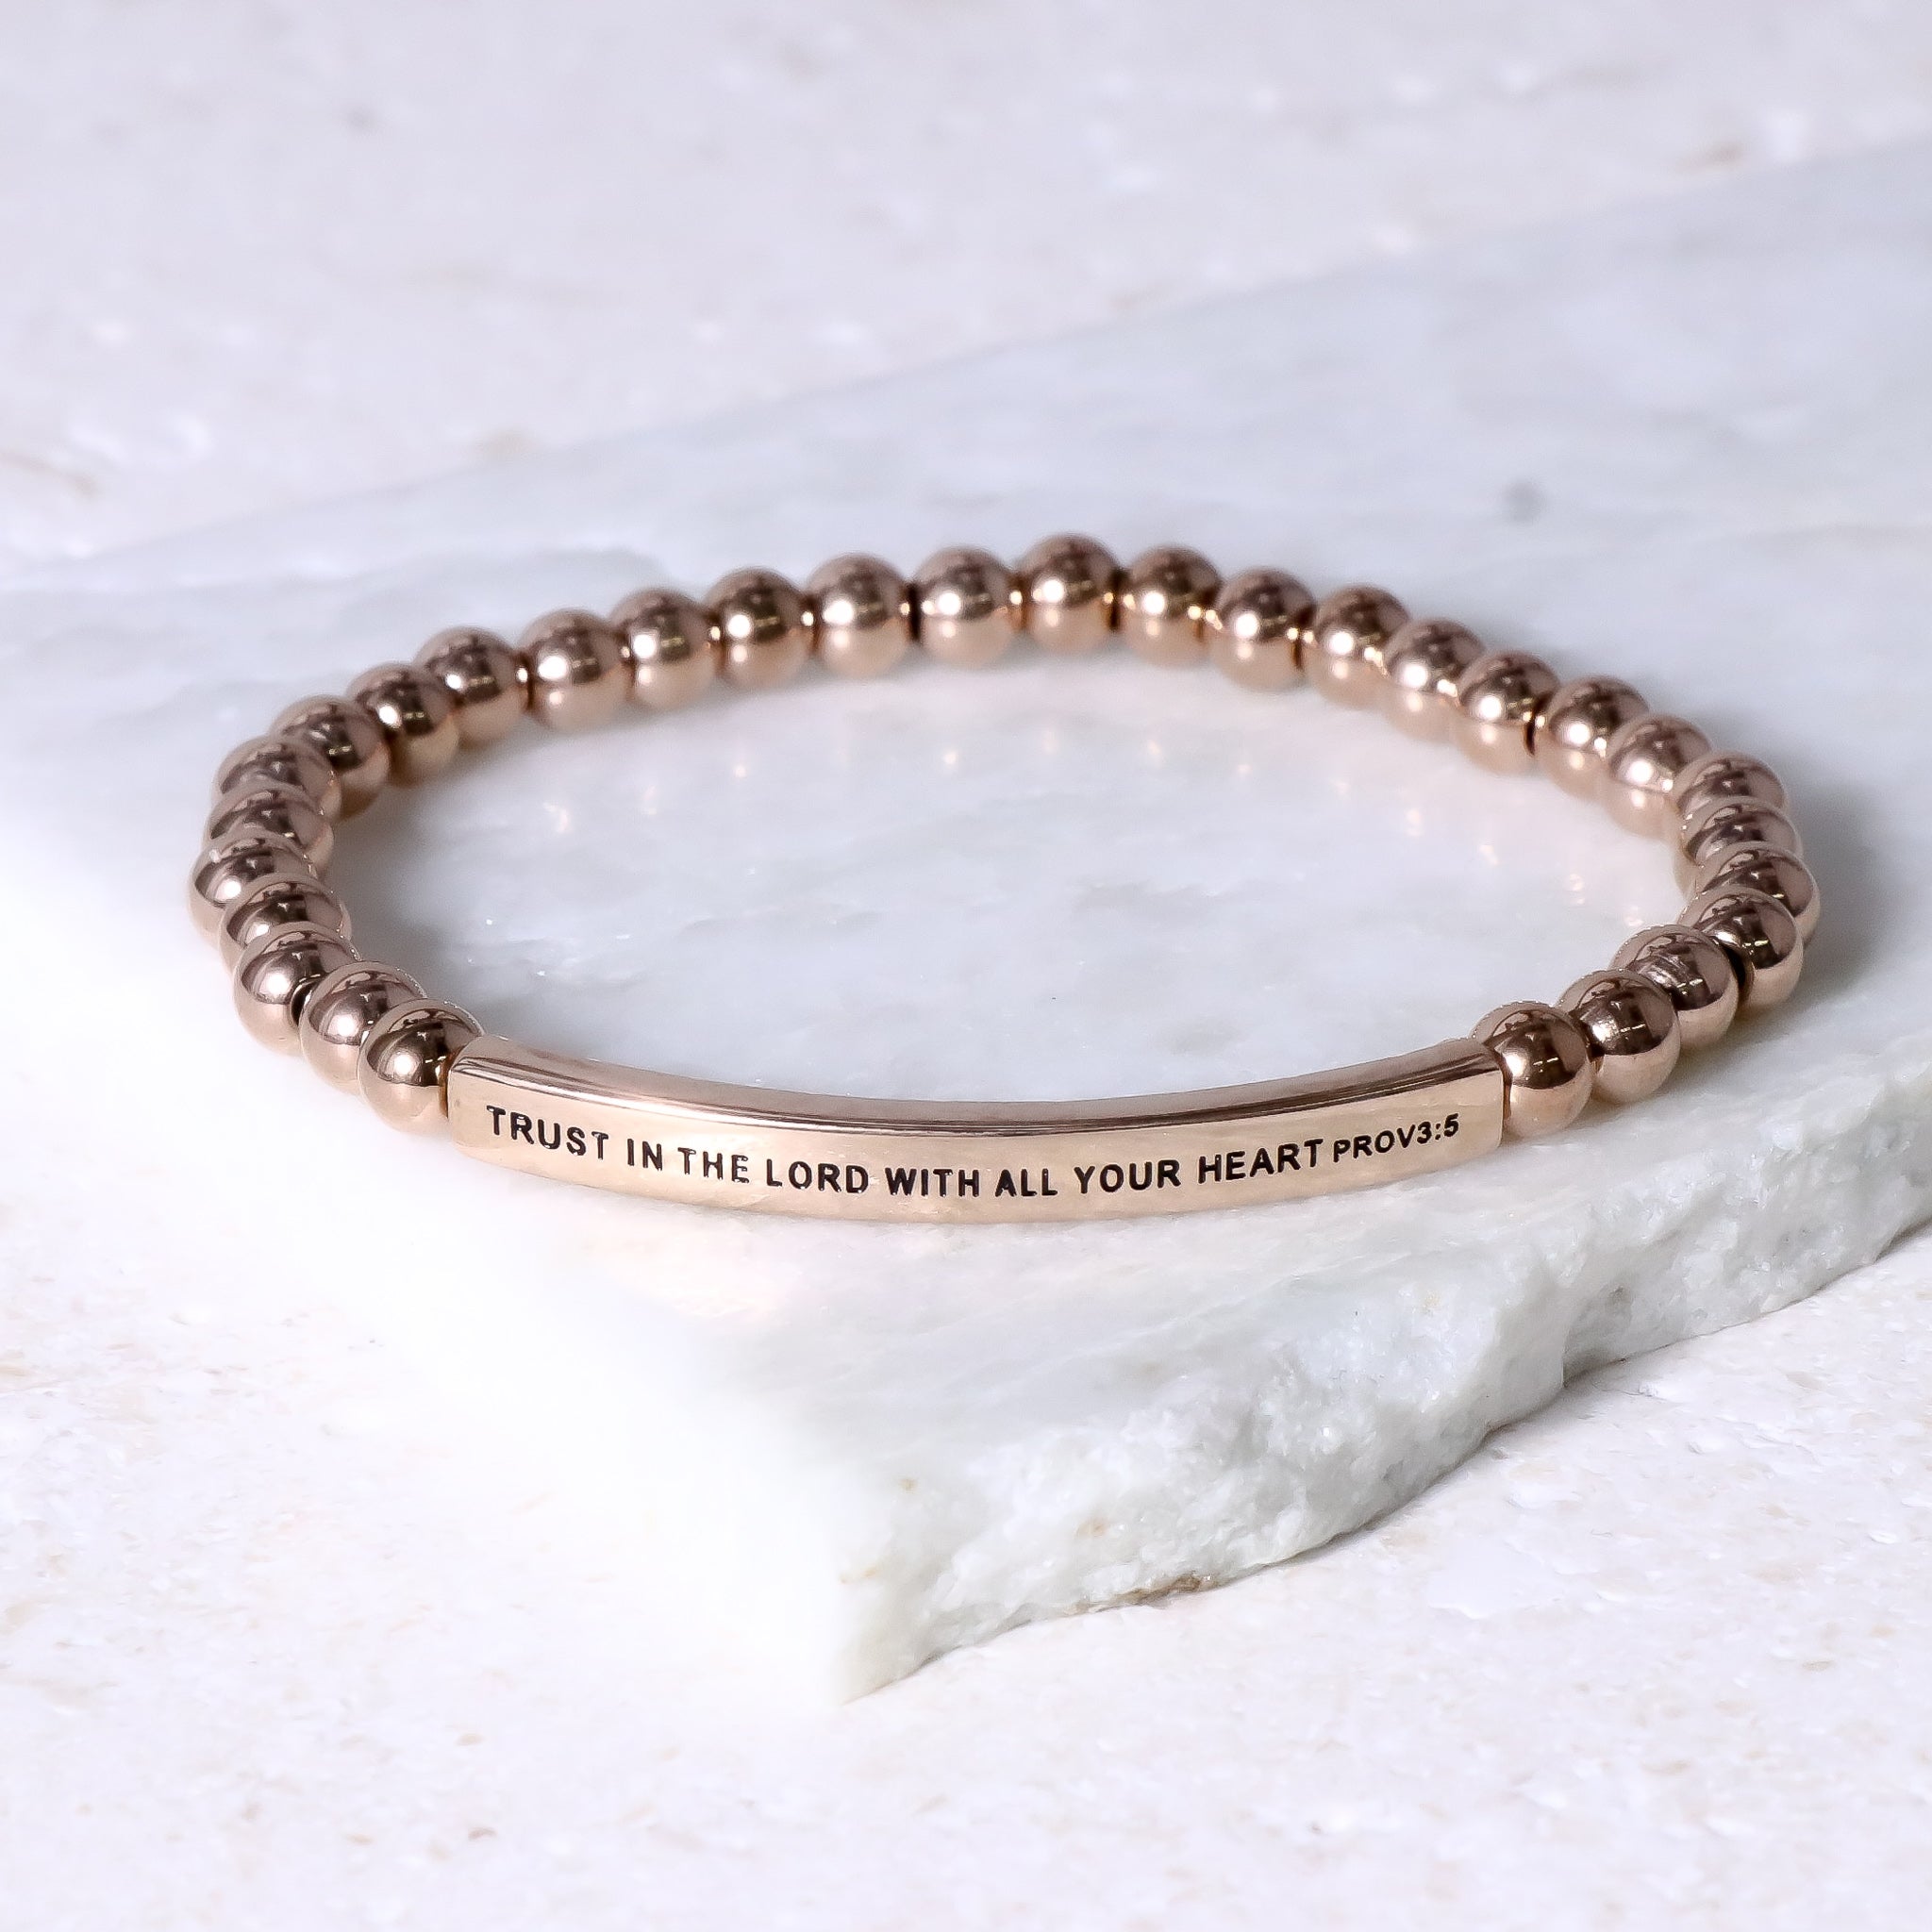 5 Inspirational Bracelets with Meaning